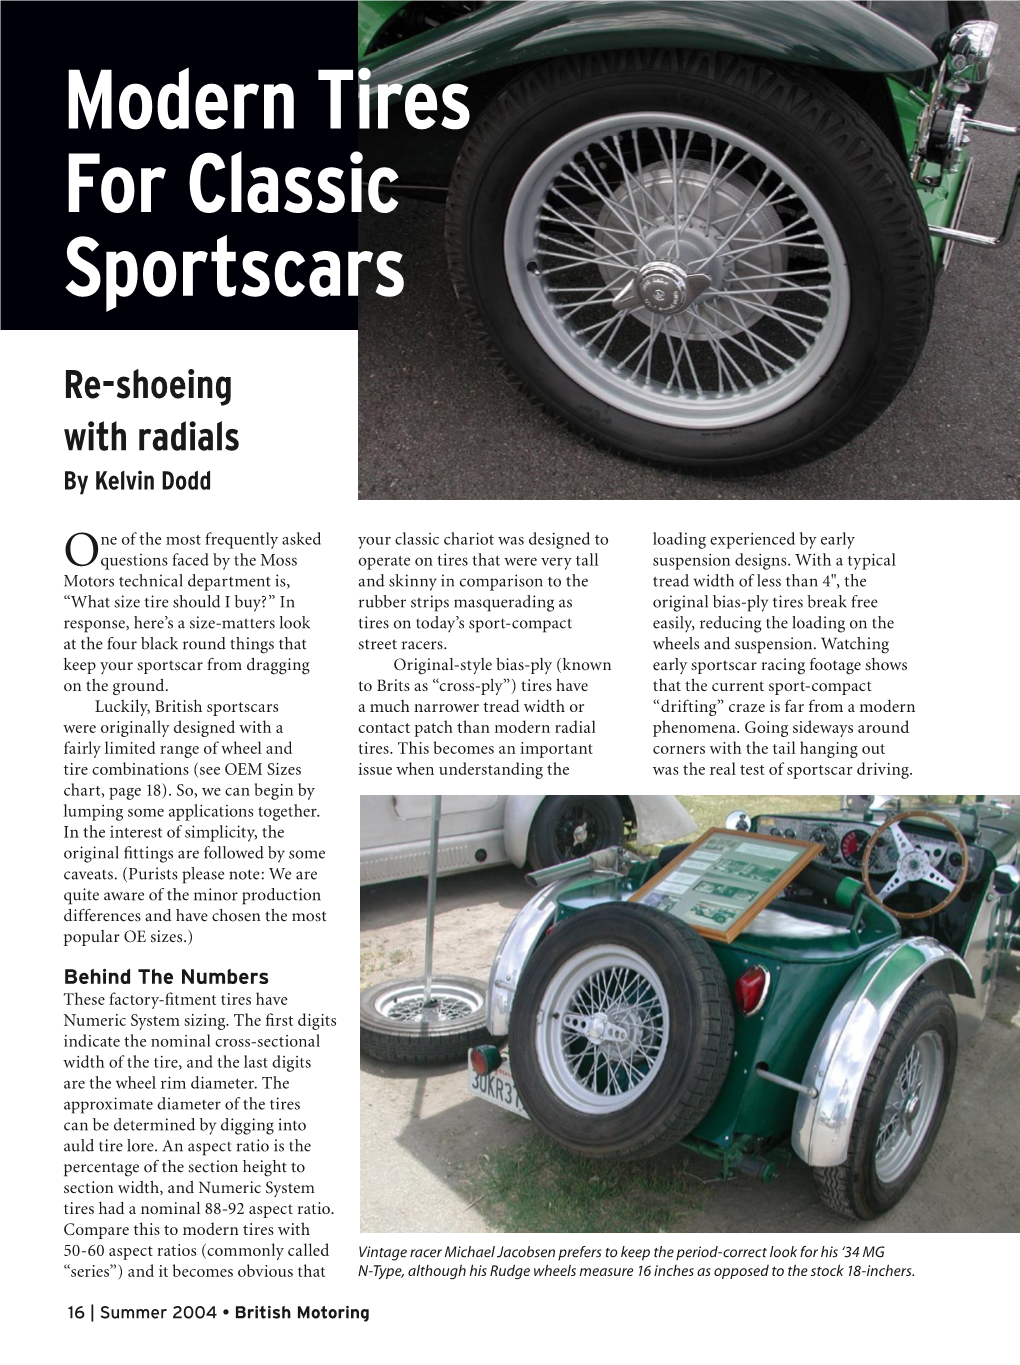 Modern Tires for Classic Sportscars